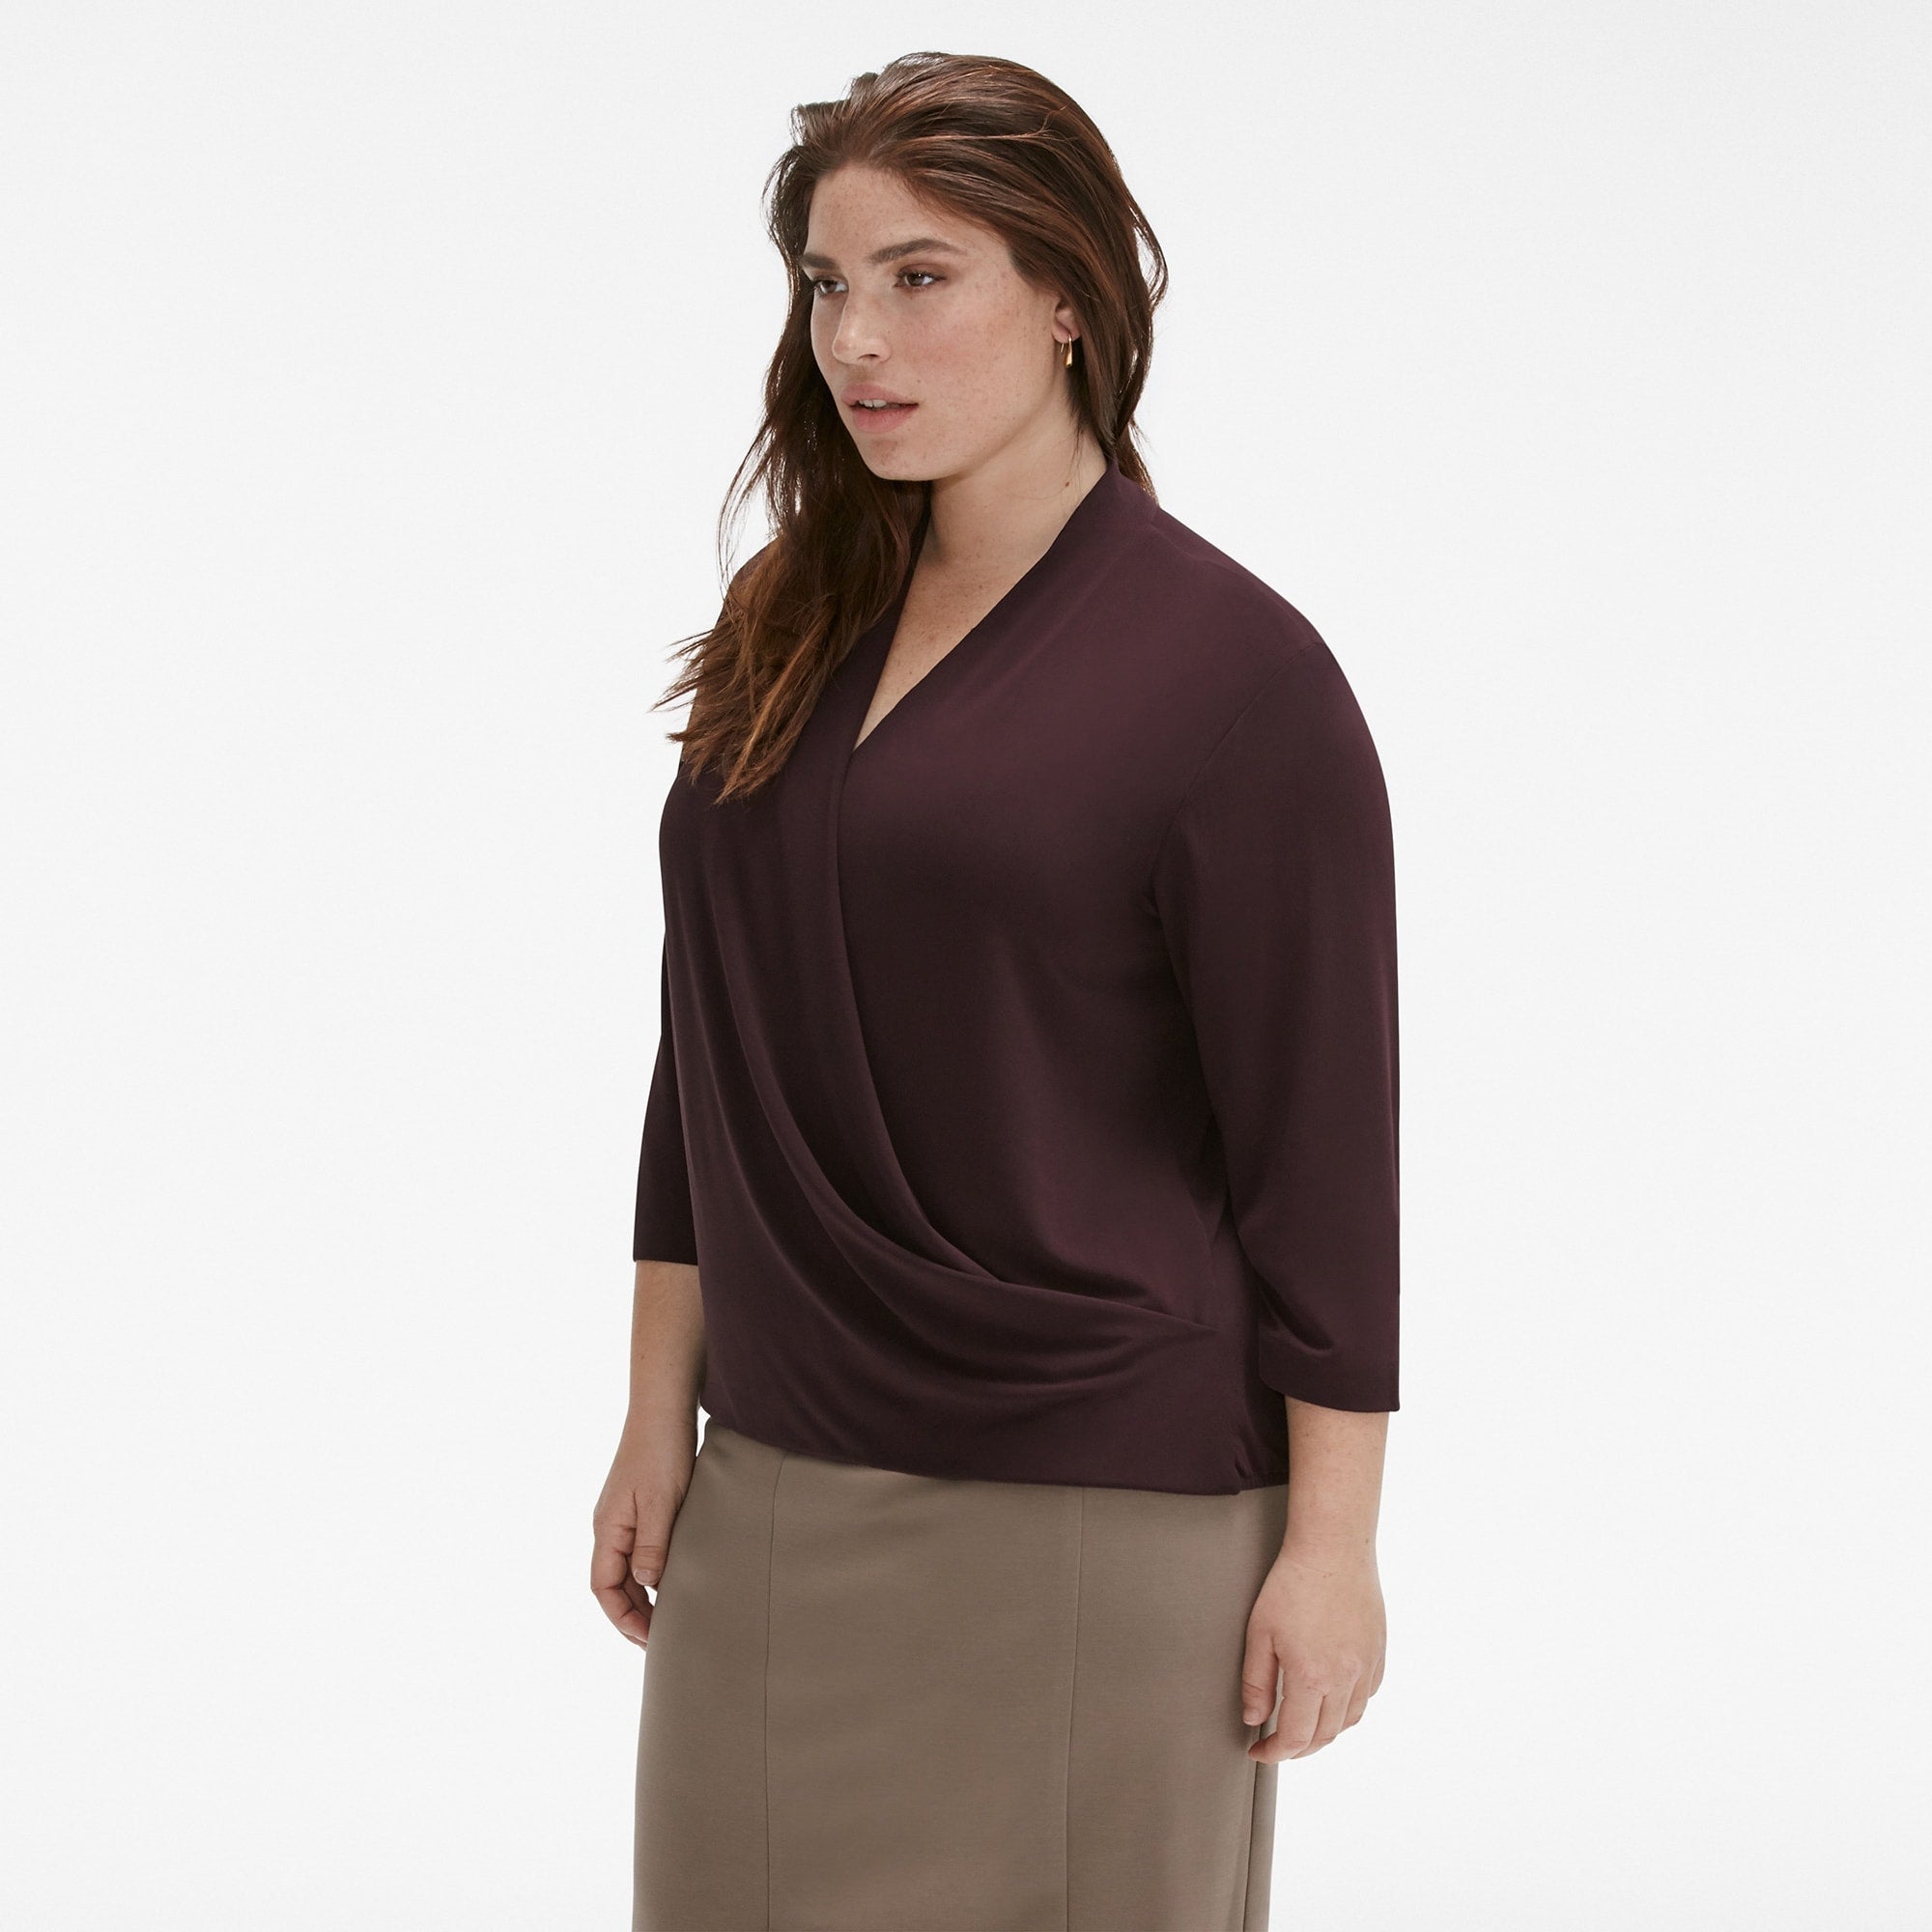 Side image of a woman standing wearing the Deneuve Top in blackberry